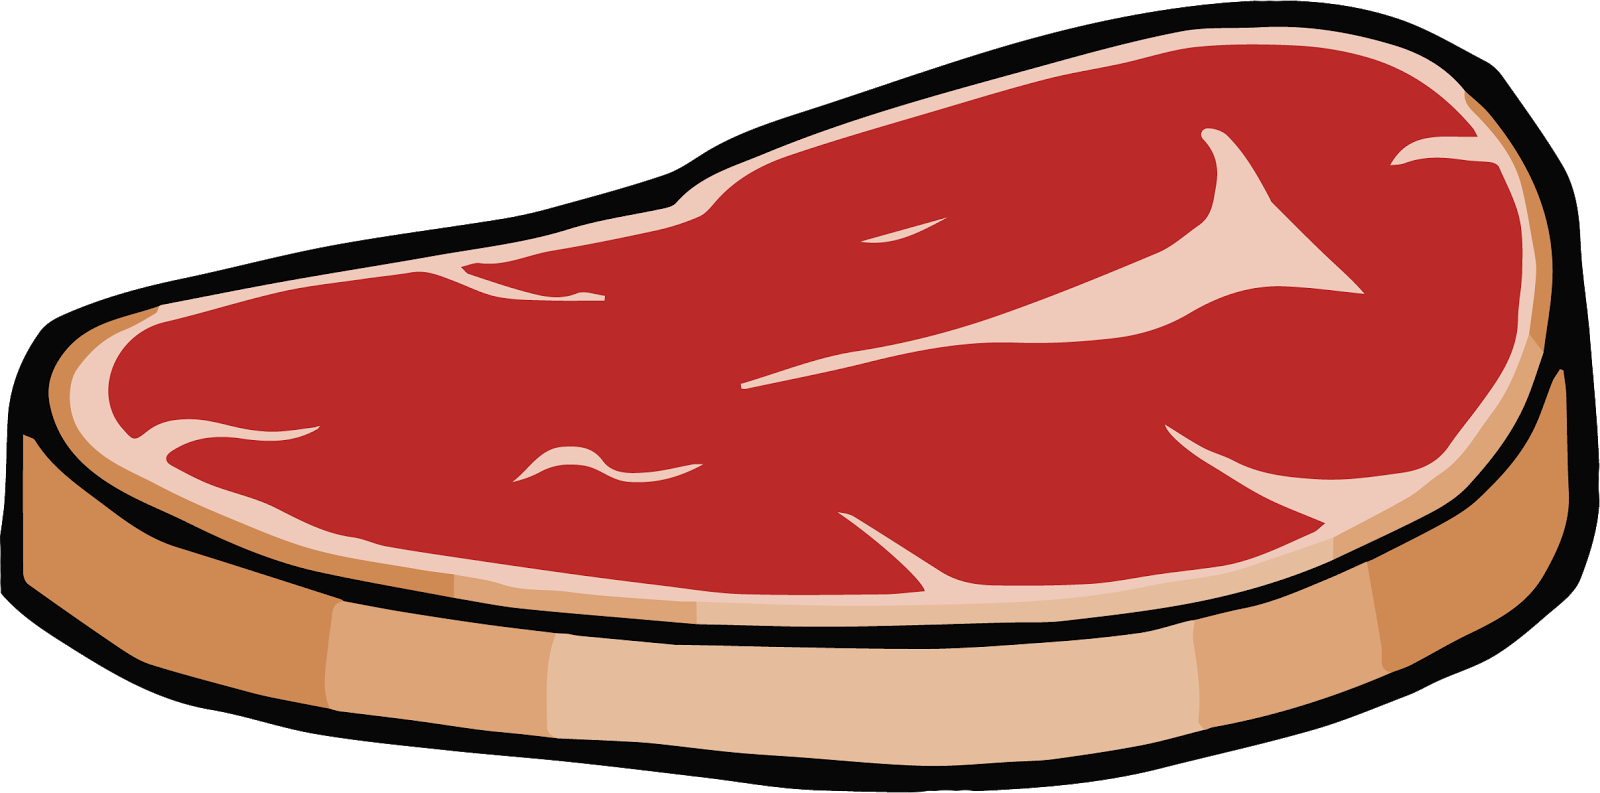 Meat Clipart Well Rumple You Cause